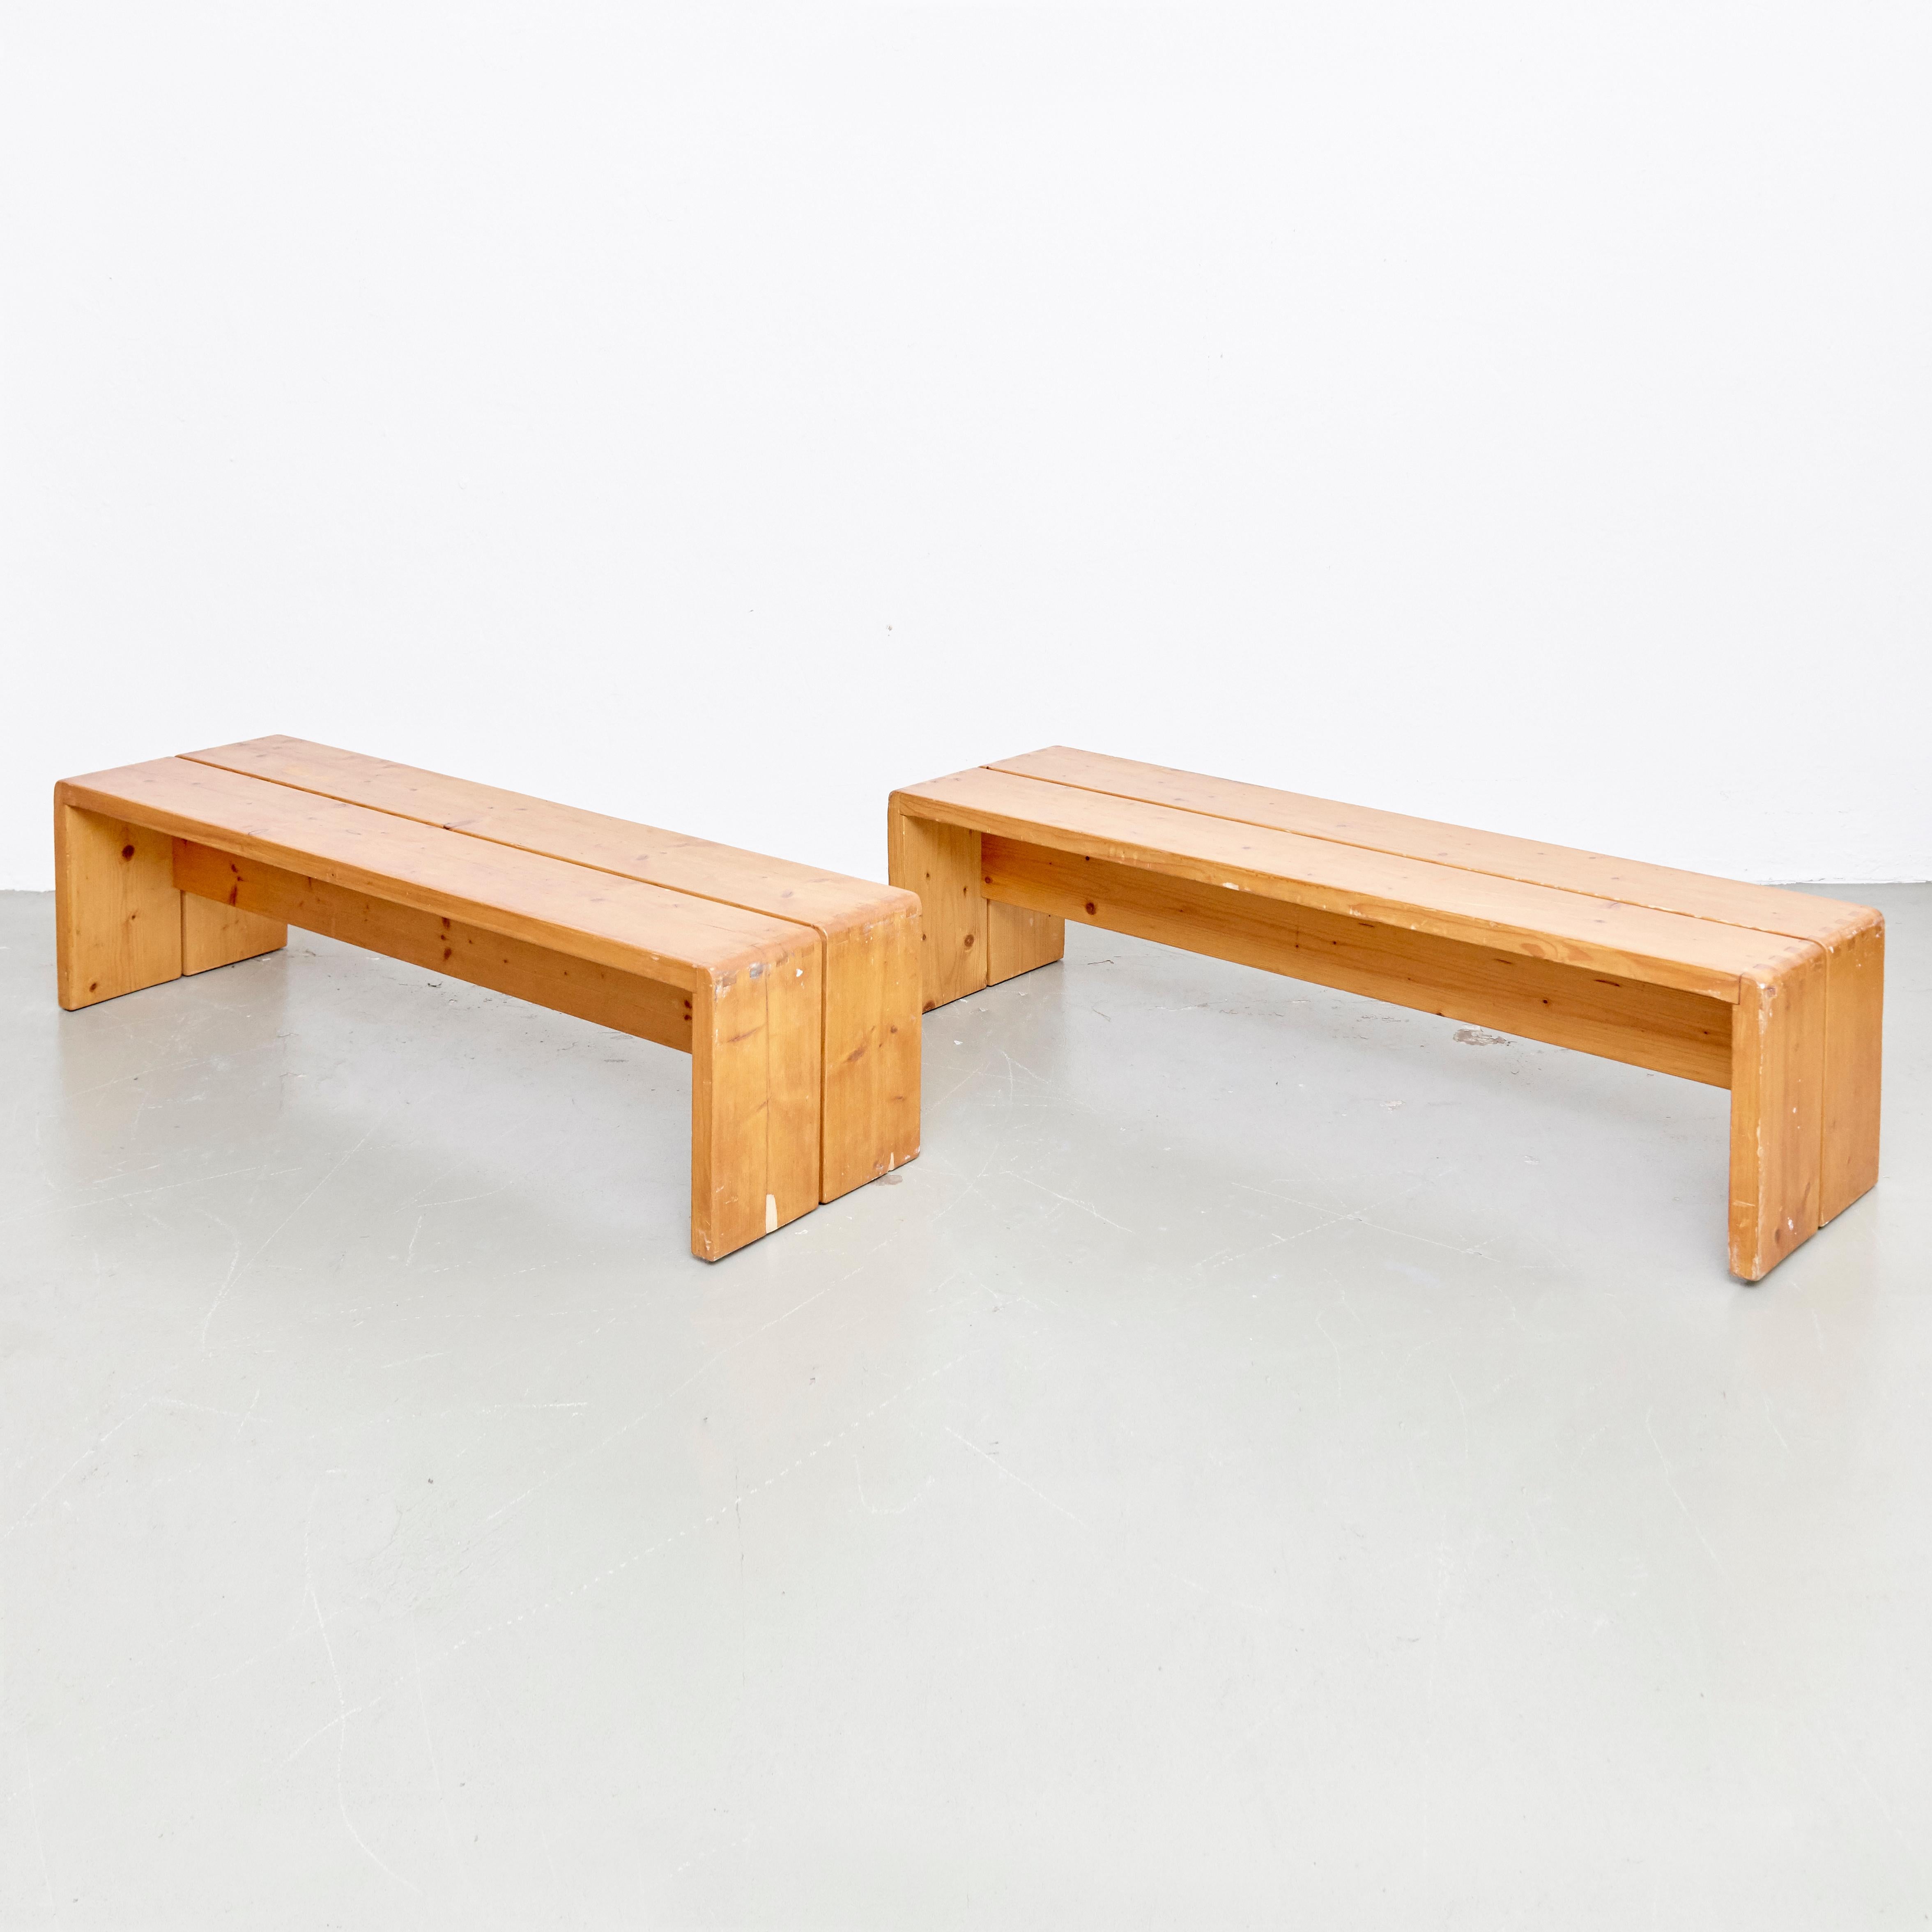 Set of Four Charlotte Perriand Large Wood Benches for Les Arcs, circa 1960 1